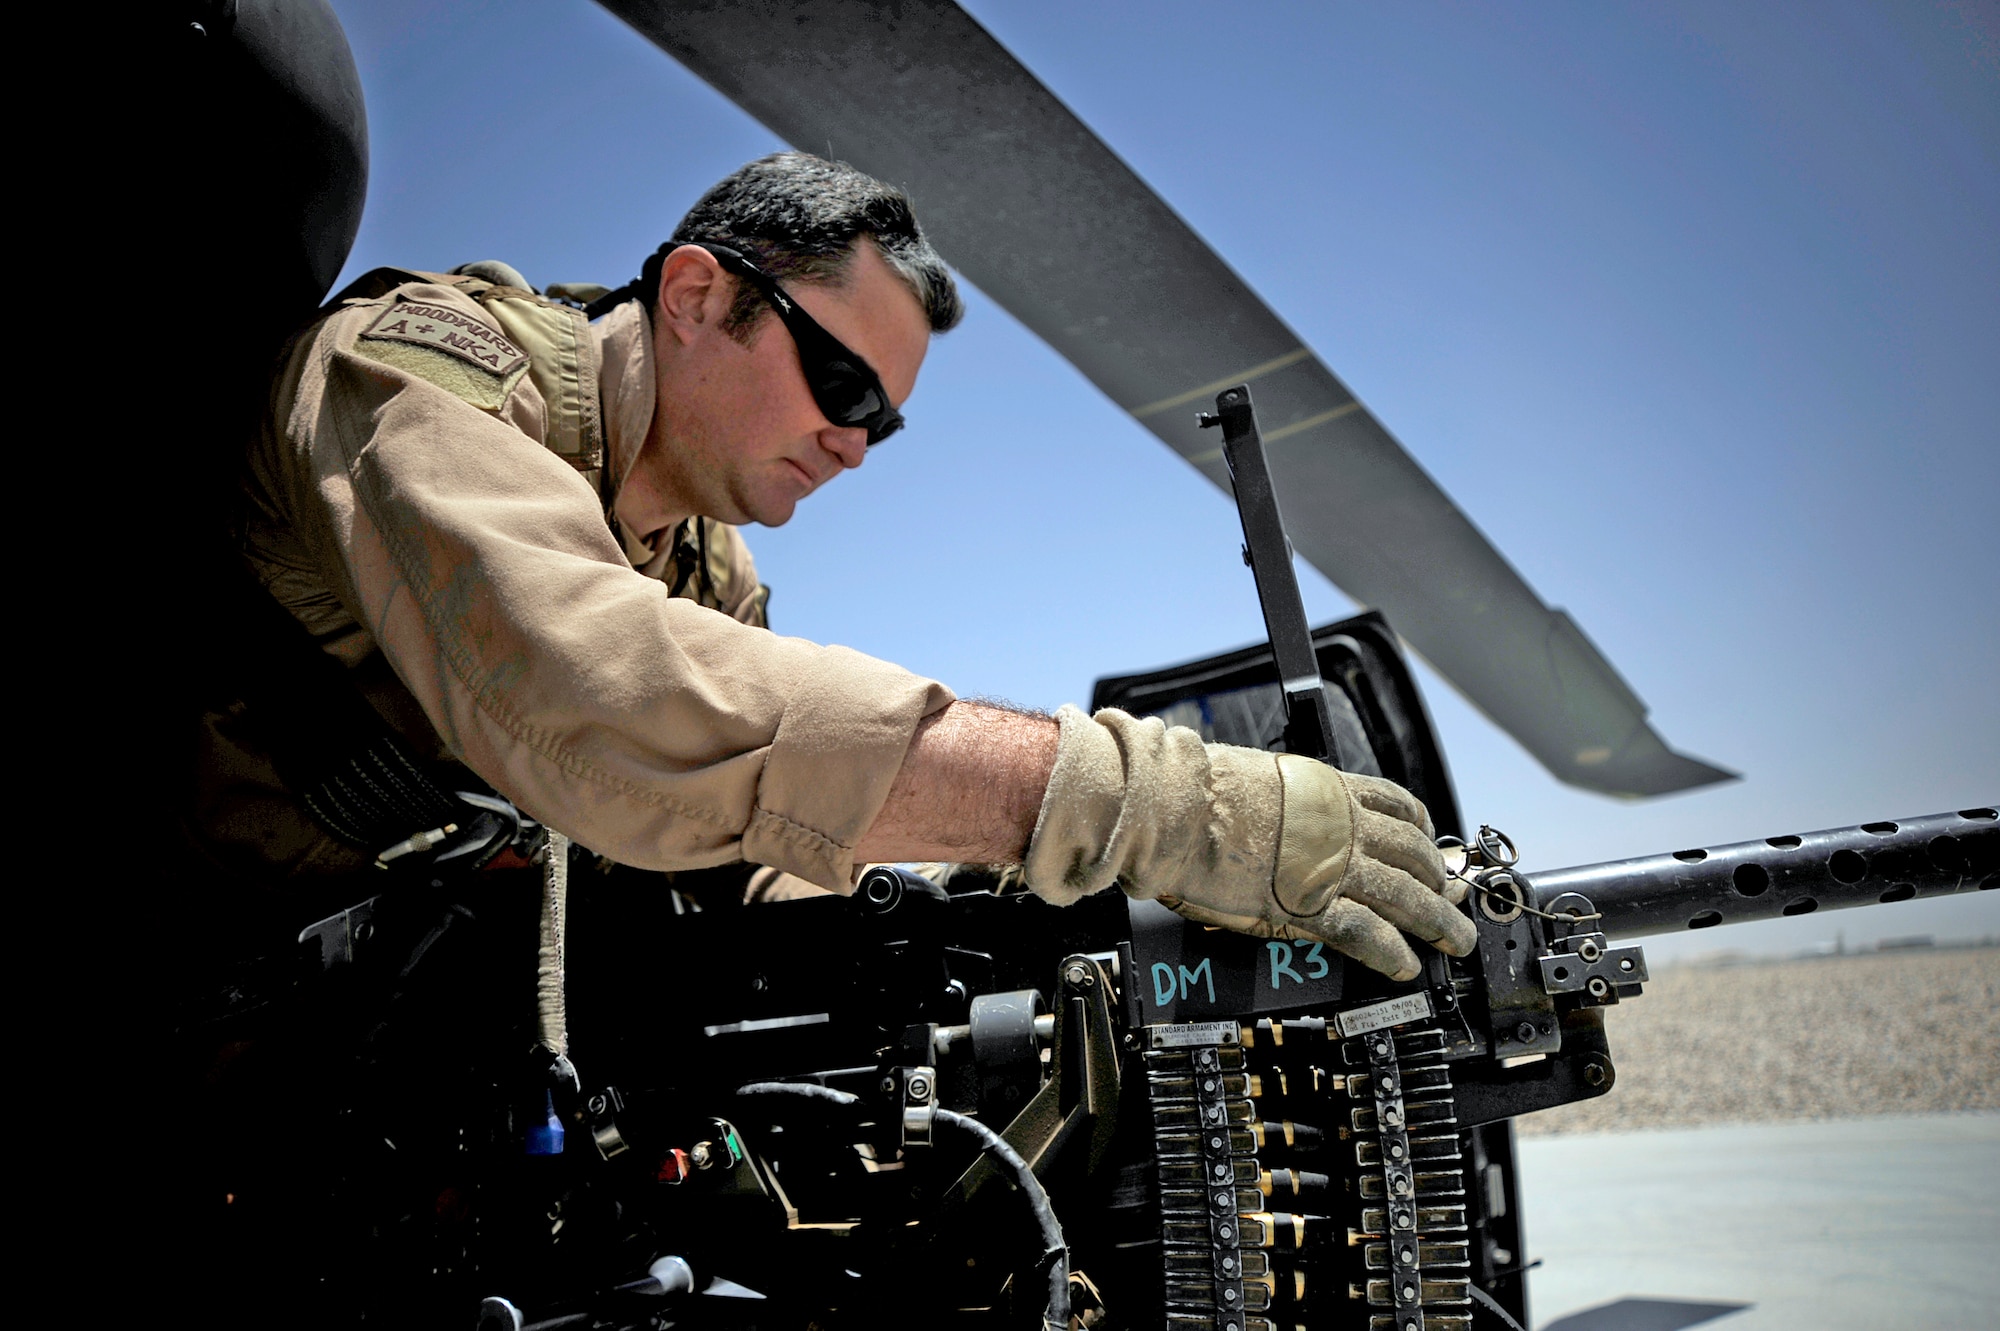 Tech. Sgt. Brock Woodward performs a preflight inspection of a .50 caliber machine gun June 23 at Camp Bastion, Afghanistan. Sergeant Woodward is a flight engineer with the 129th Expeditionary Rescue Squadron. (U.S. Air Force photo/Staff Sgt. Shawn Weismiller) 